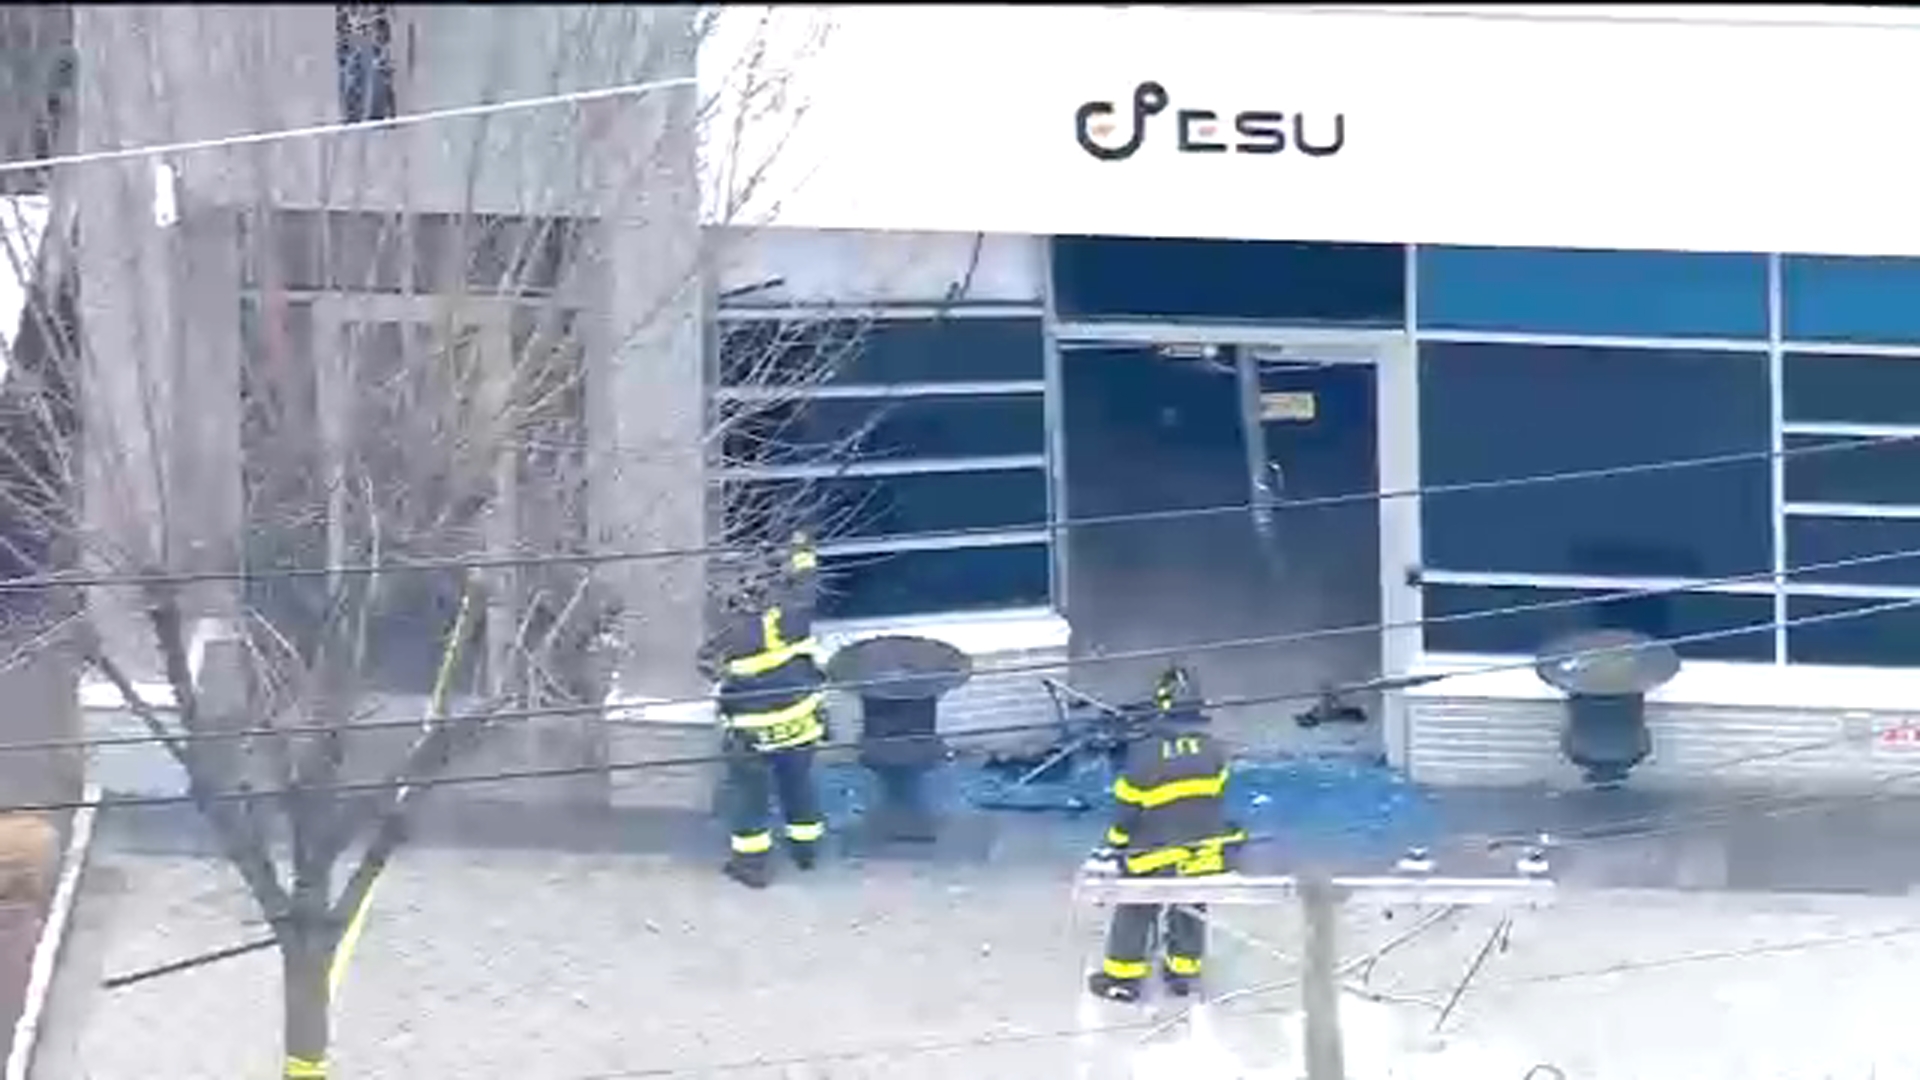 Local handyman crushed after SUV rolls over him, crashes into Porsche dealership in New Jersey